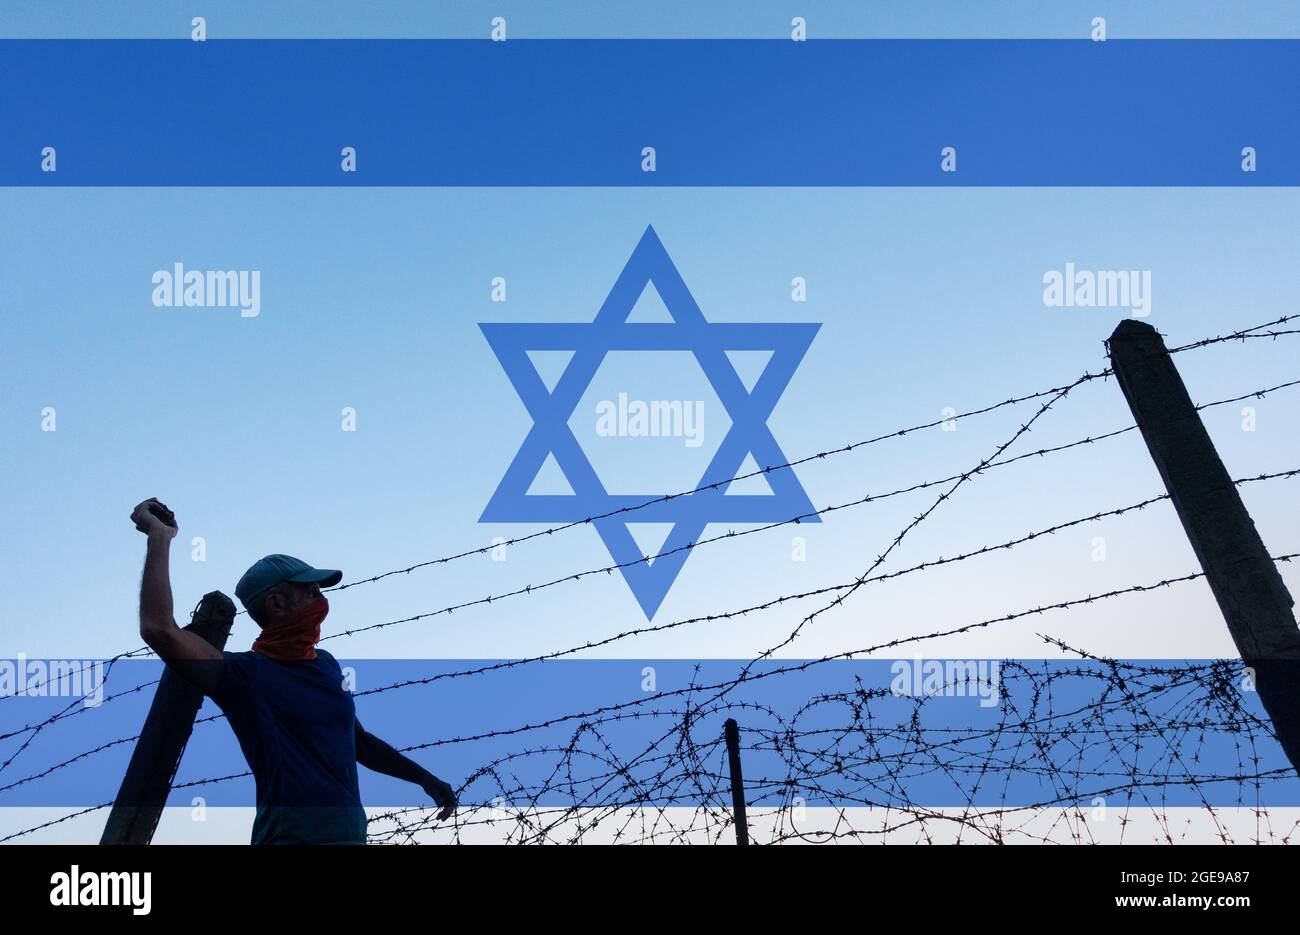 Composite image of man throwing rock over barbed wire fence with flag of Israel in background. Border control, fence, Middle East, protest... concept. Stock Photo